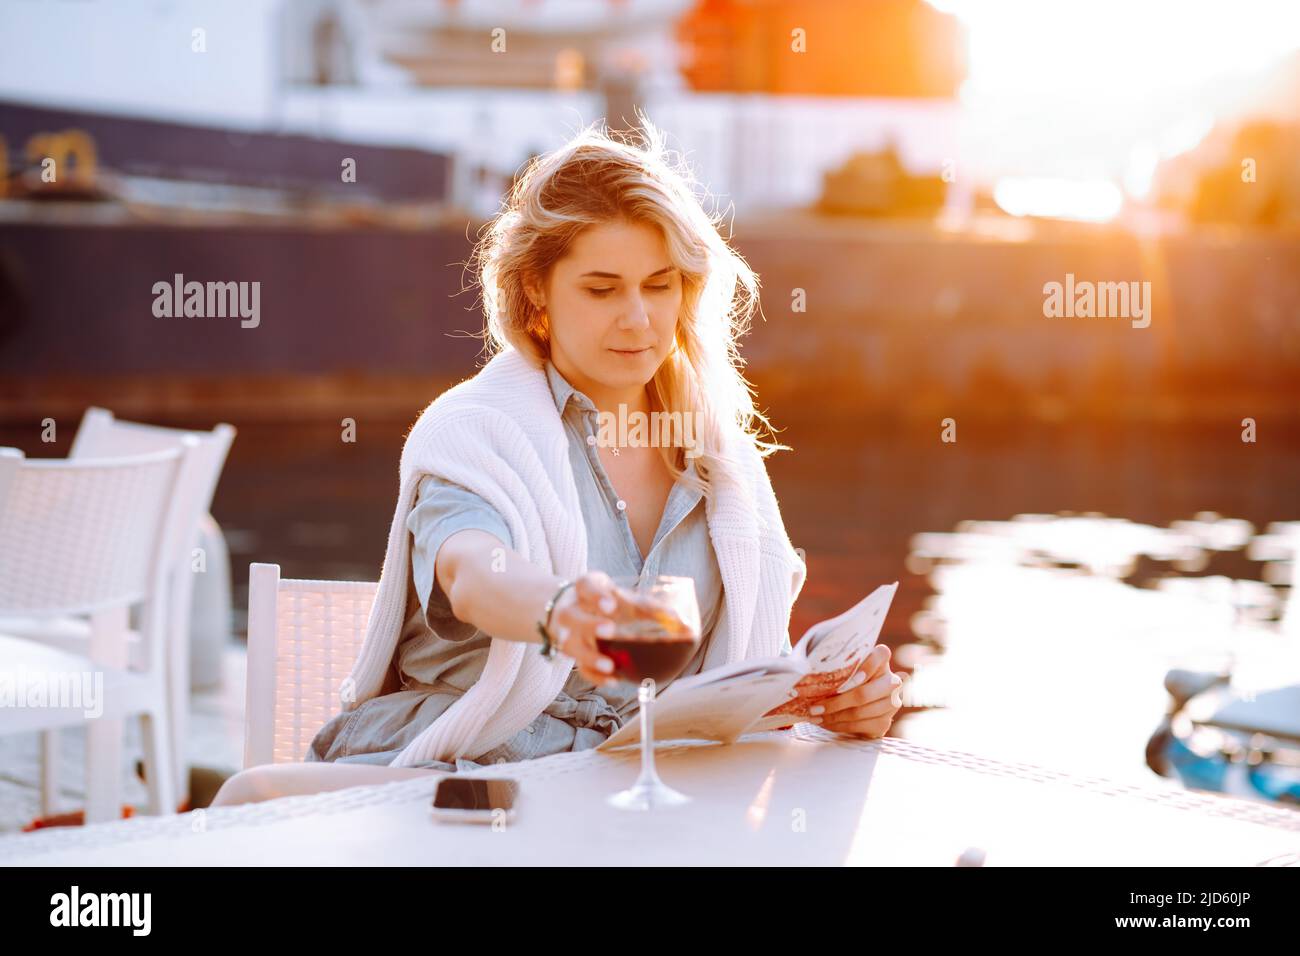 Portrait of young thoughtful gorgeous woman with long hair, wearing blue shirt, white sweater, sitting at white table. Stock Photo